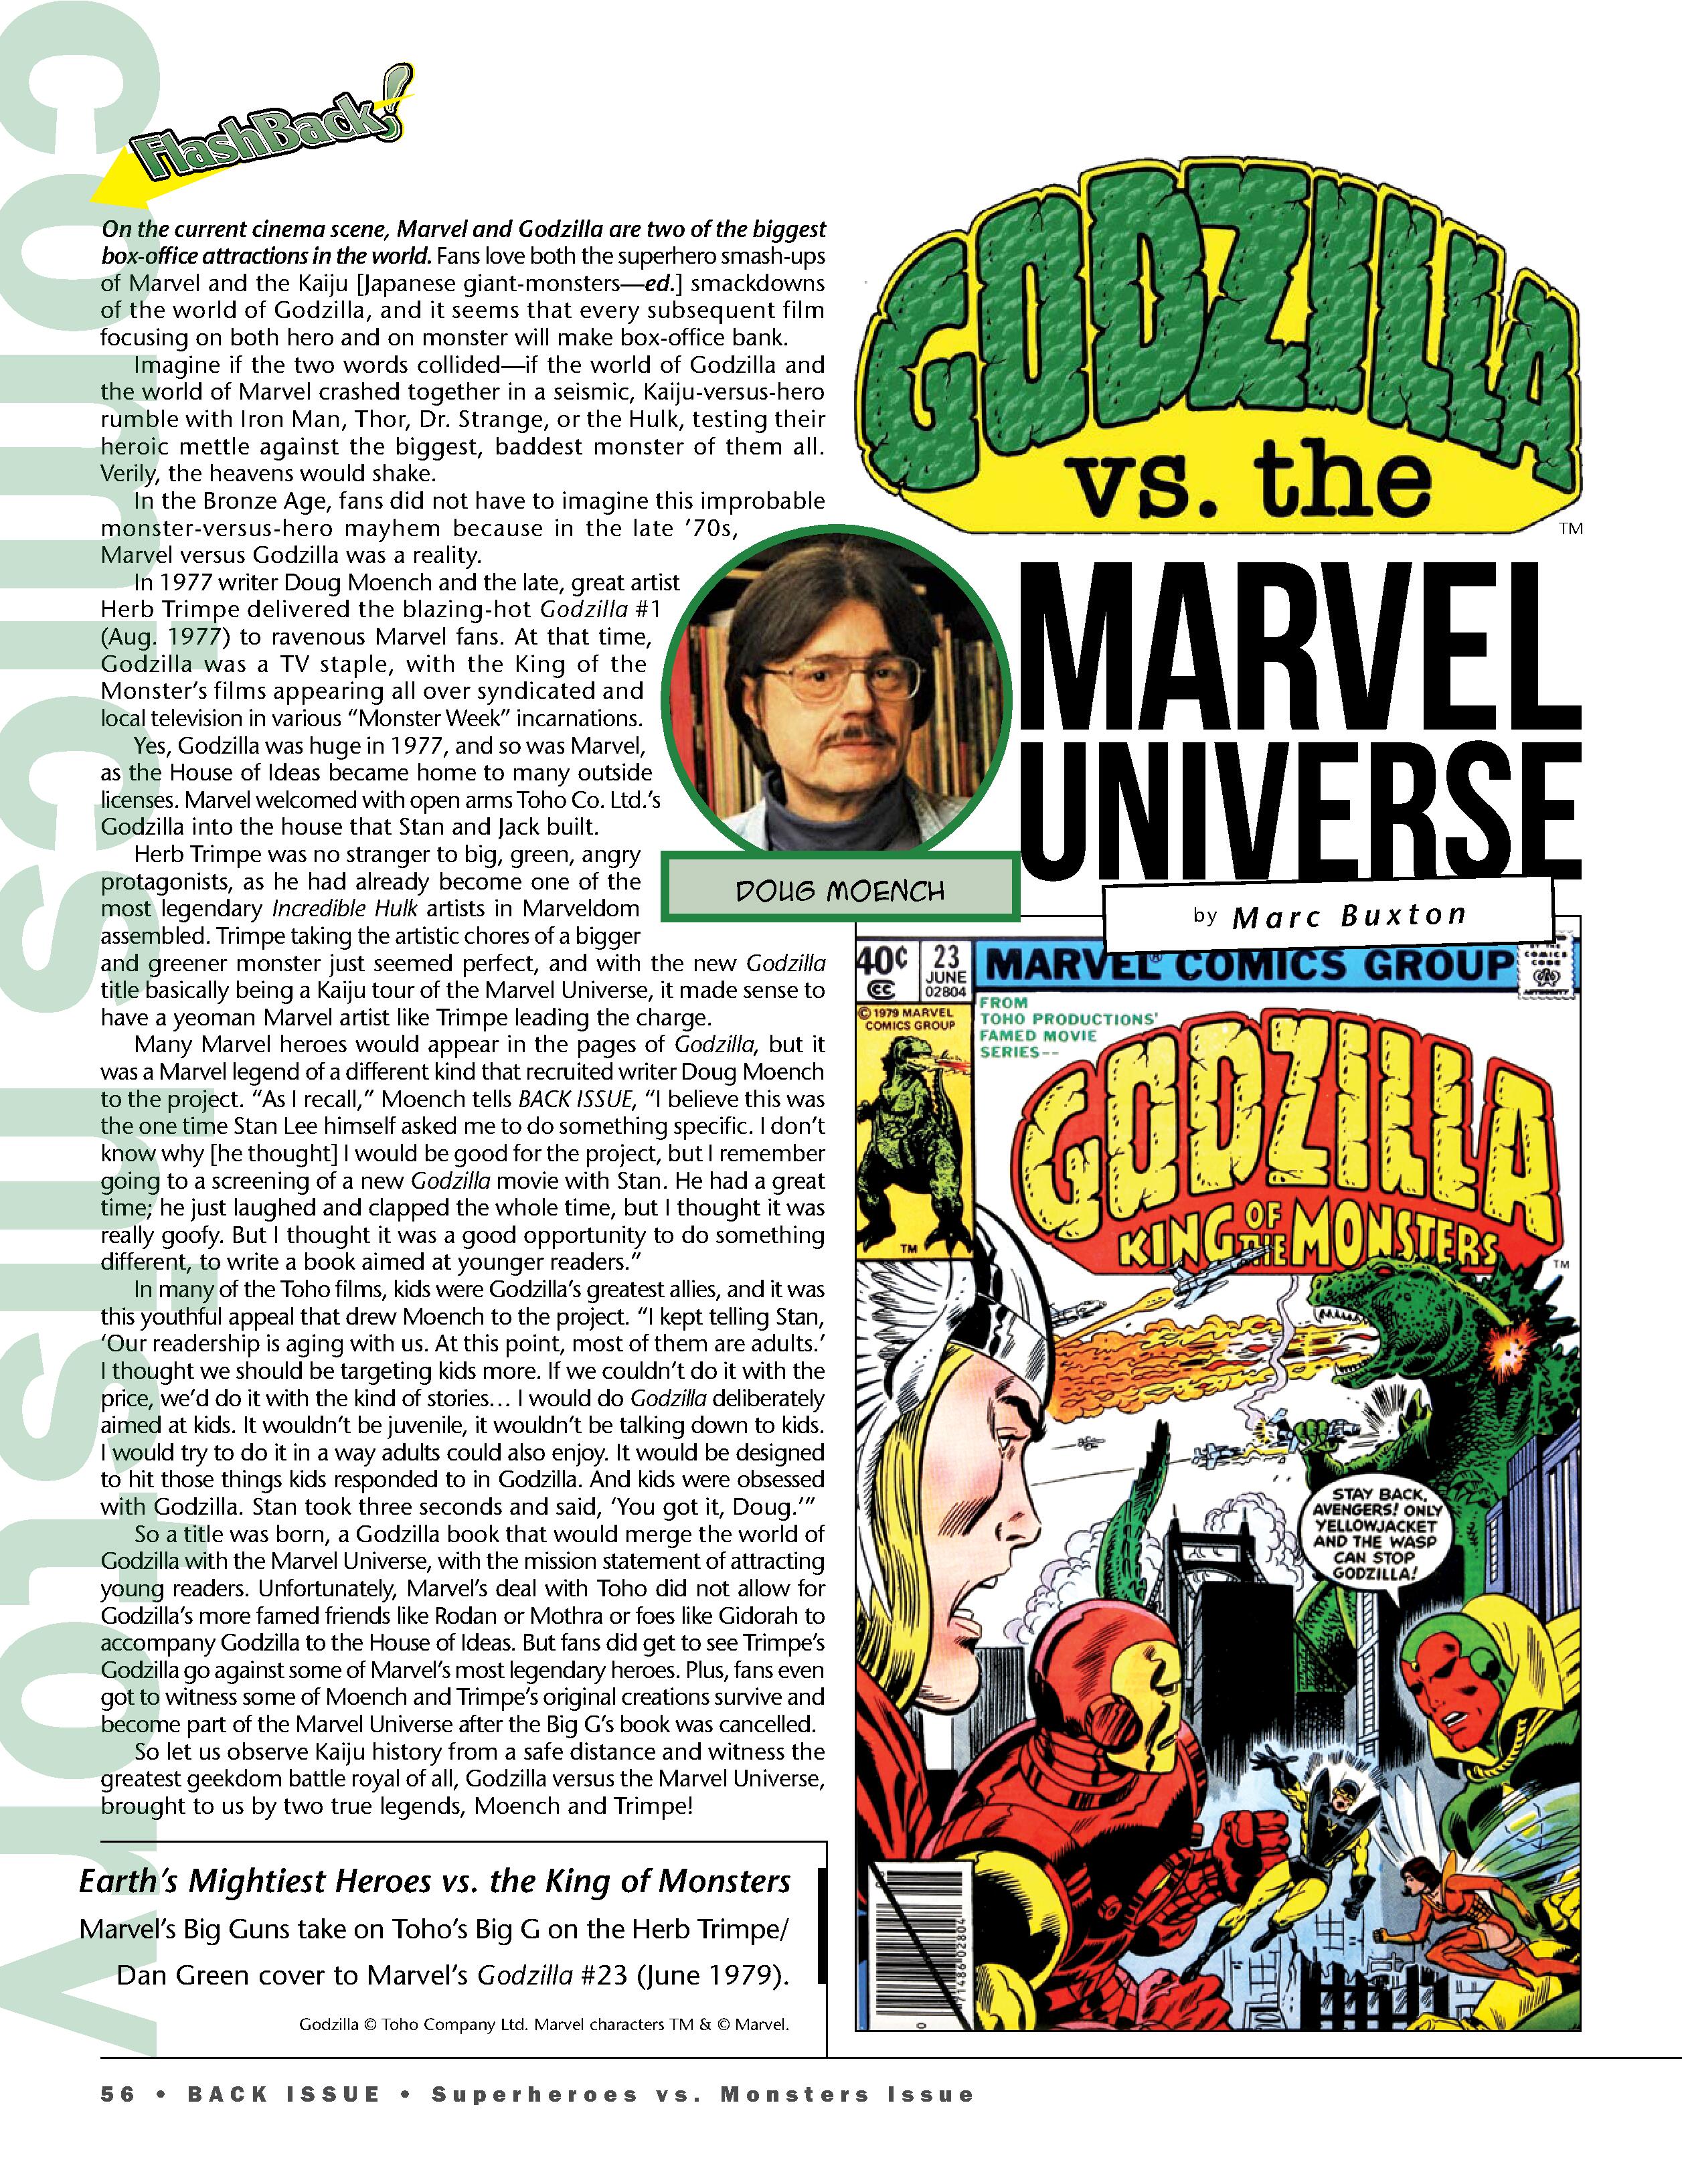 Read online Back Issue comic -  Issue #116 - 58